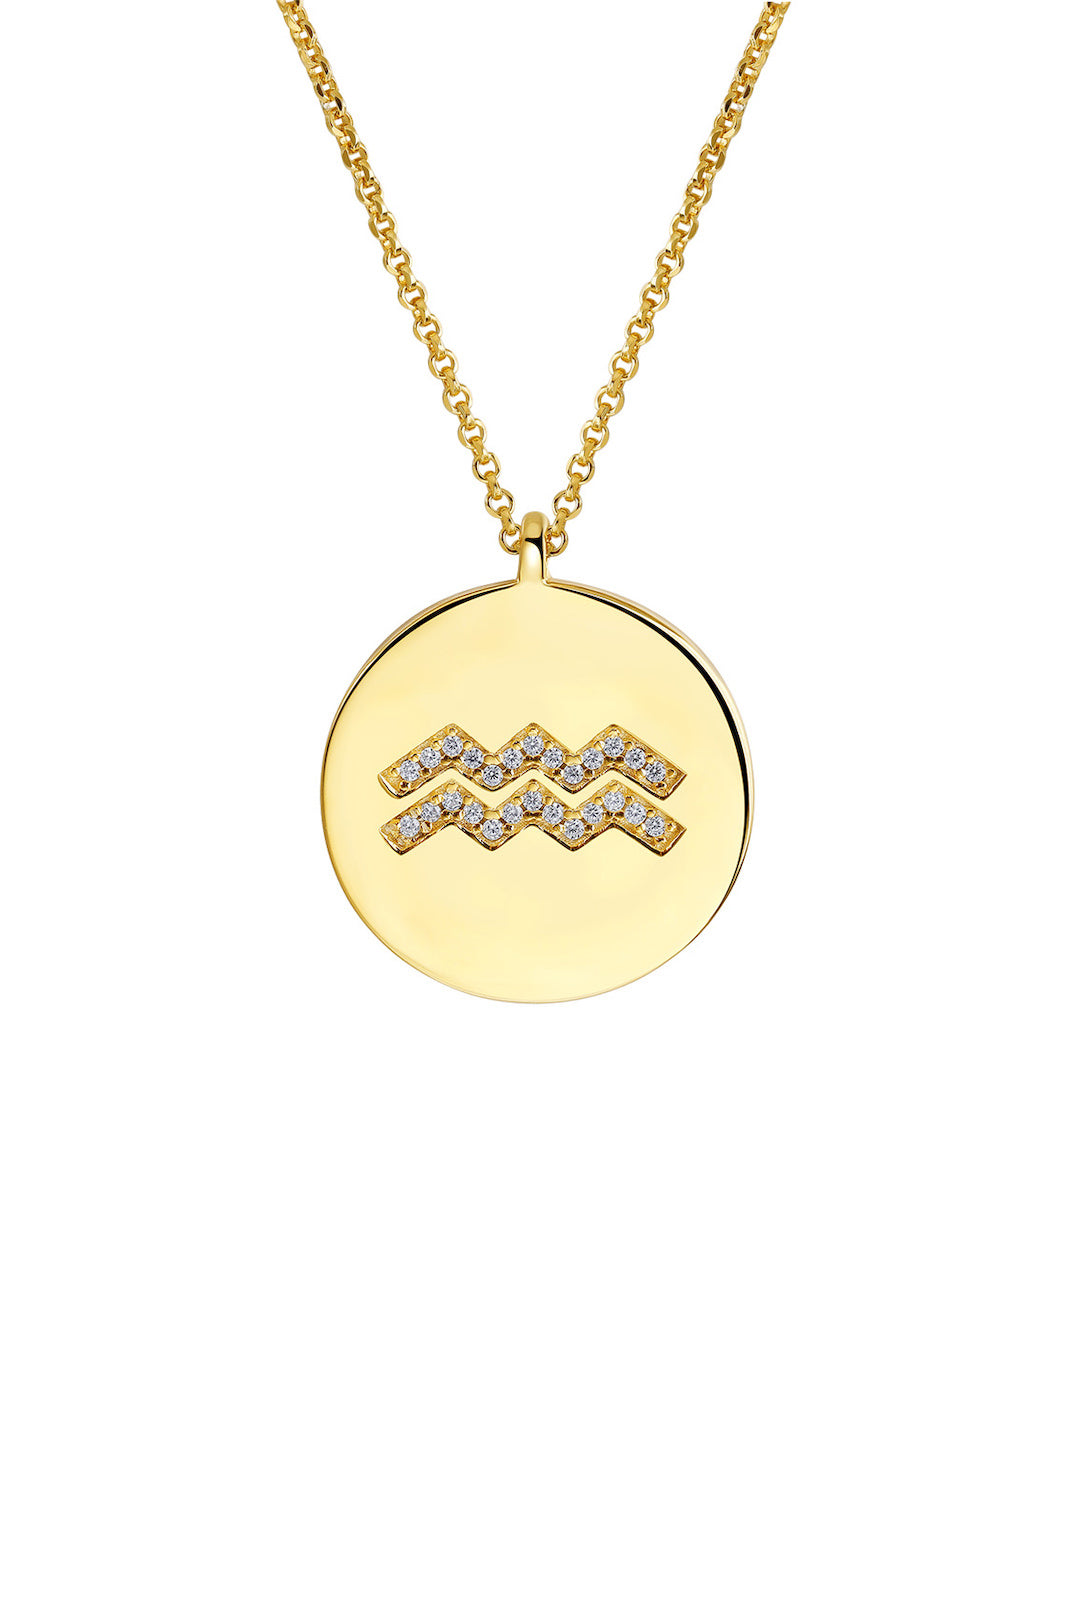 Gold Plated Silver Zodiac Necklace - Aquarius Side View